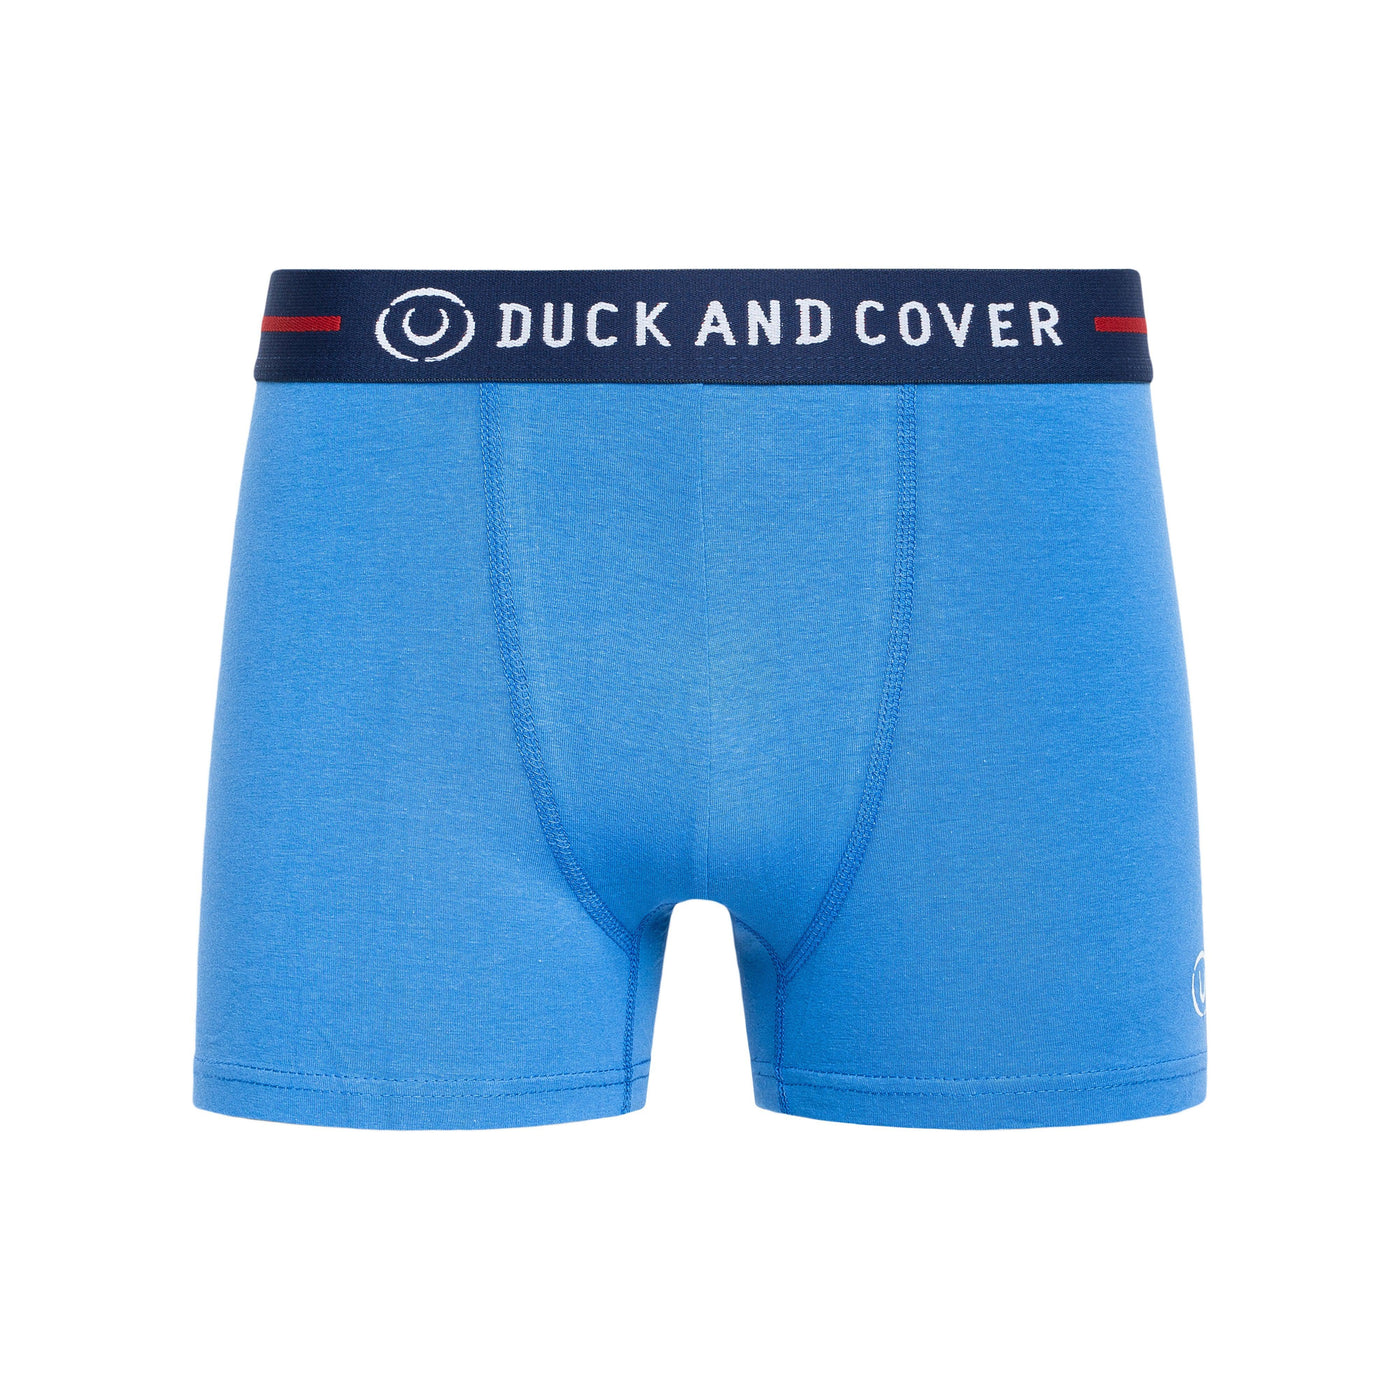 Duck and Cover Mens Stamper 2 Boxer Shorts 3pk